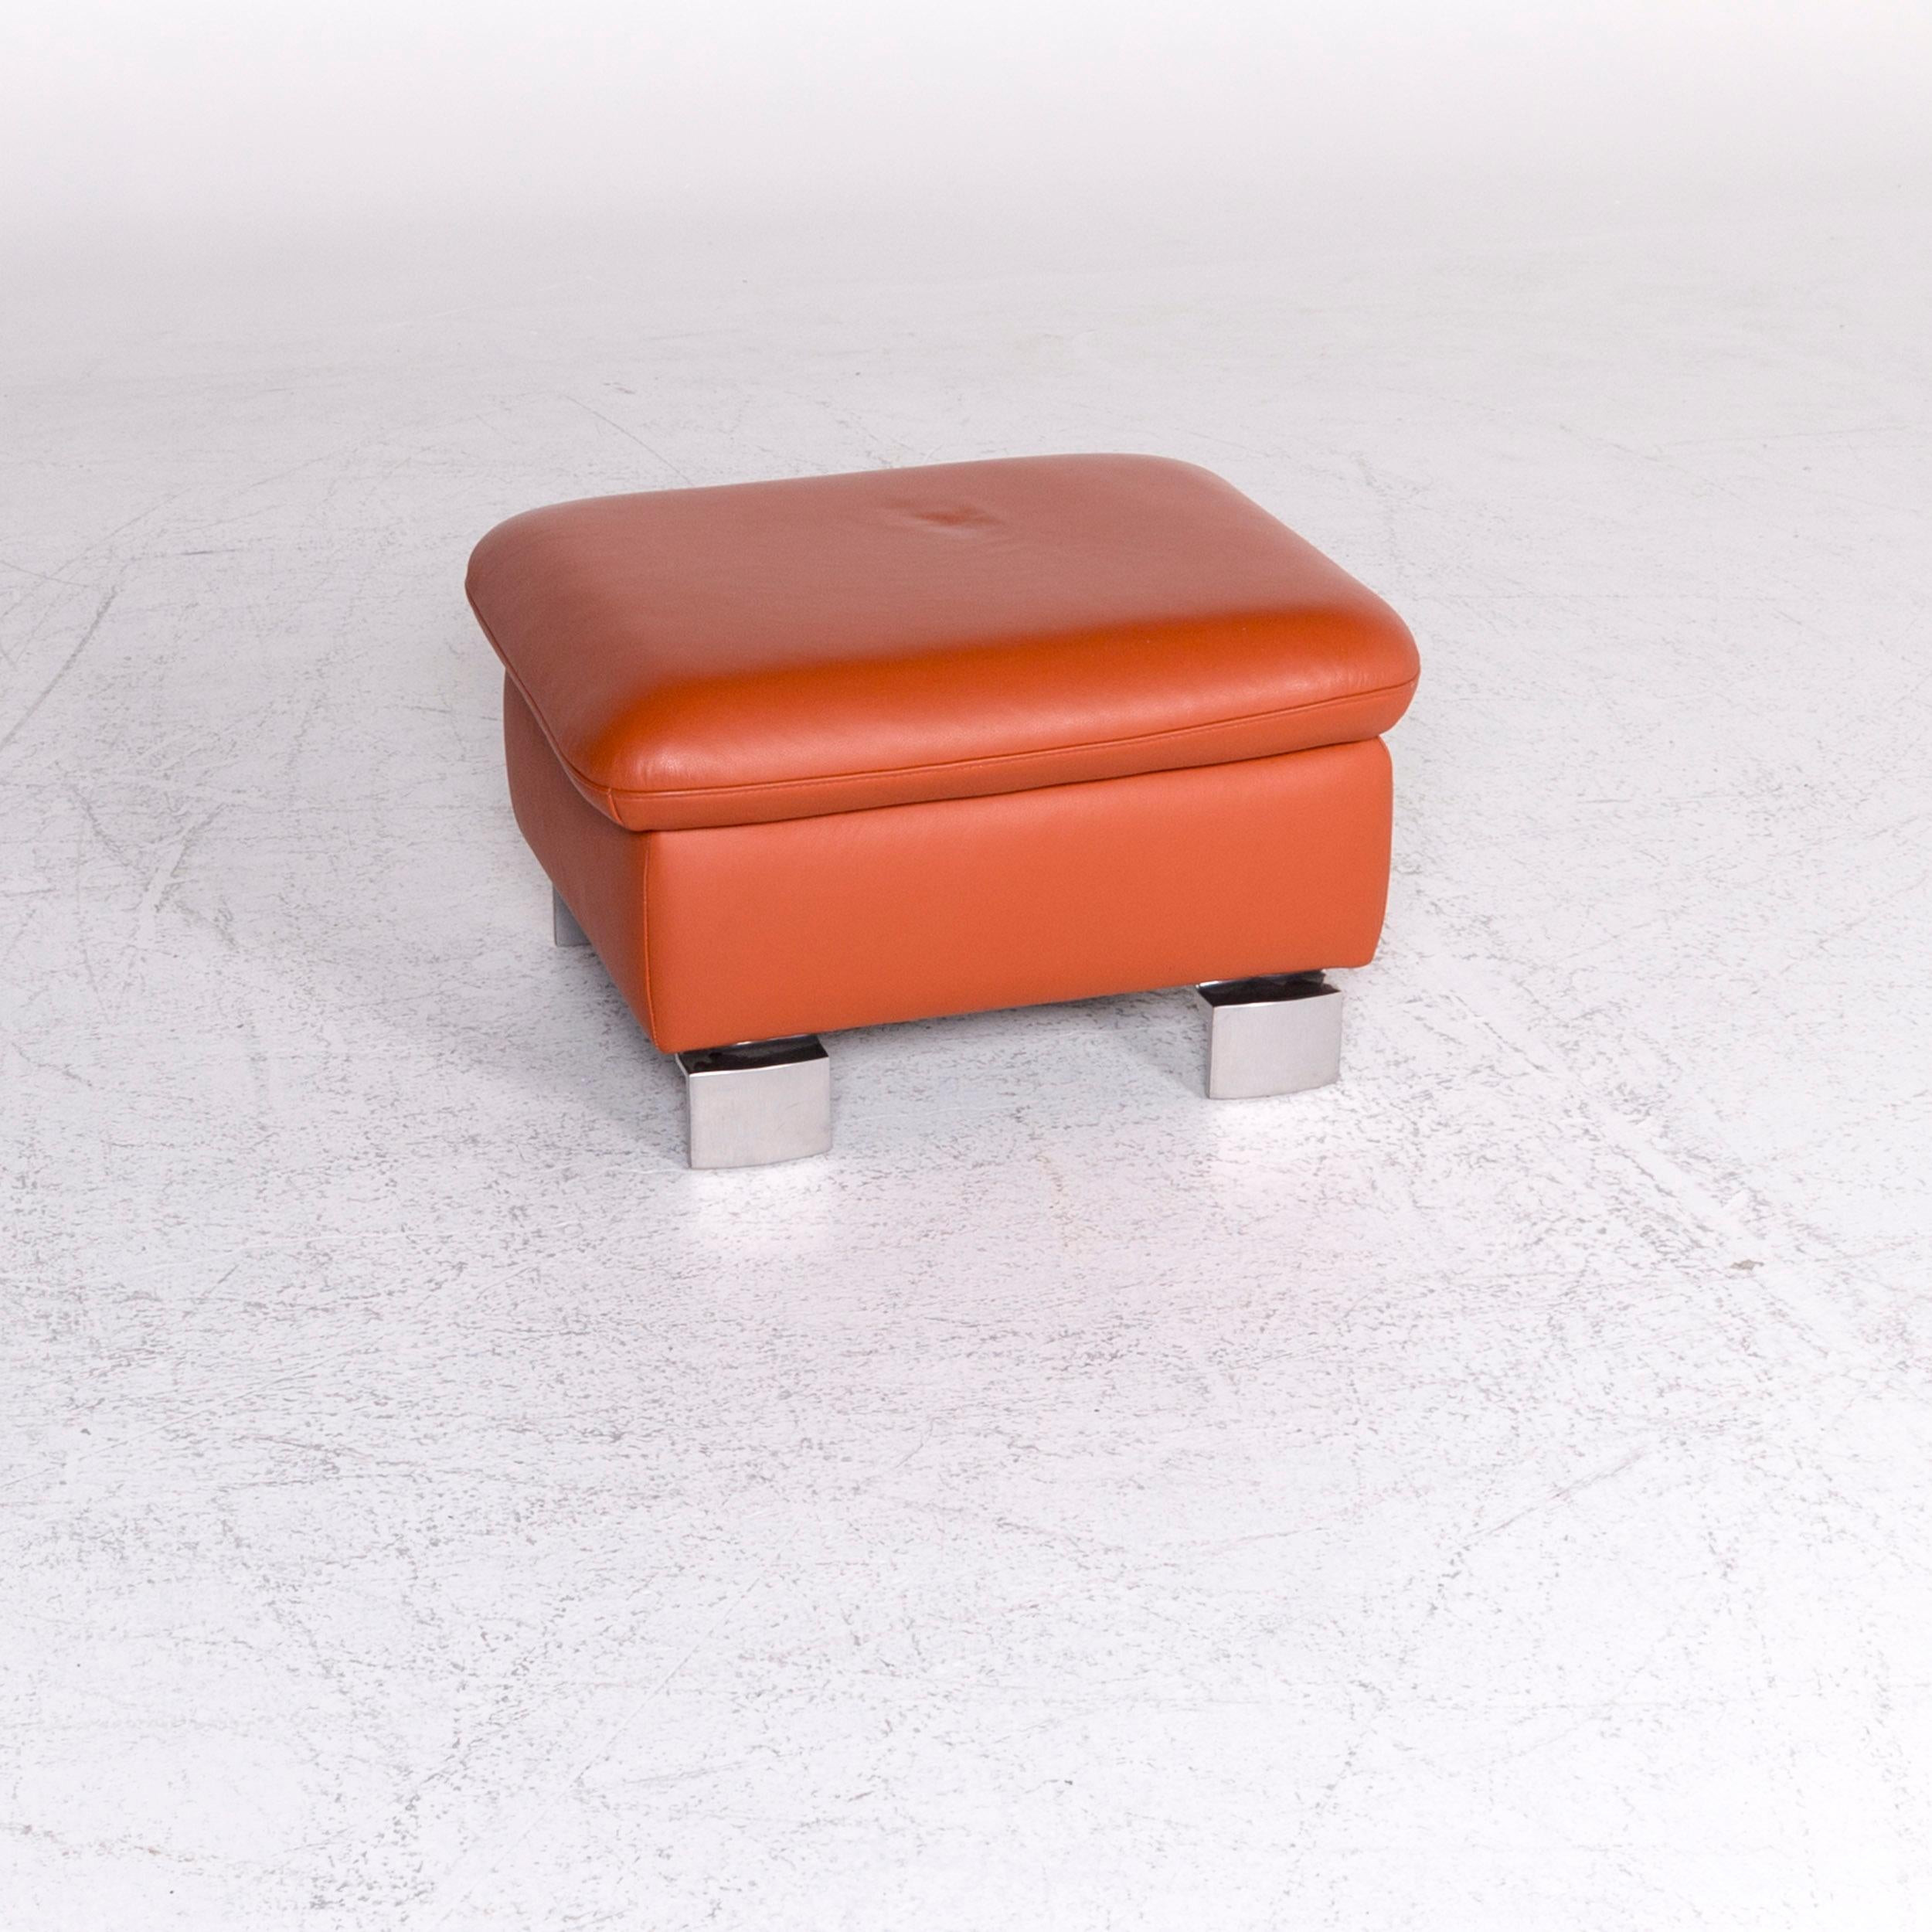 We bring to you an Ewald Schillig designer leather stool orange function storage space.

Product measurements in centimeters:

Depth 55
Width 66
Height 43.





  